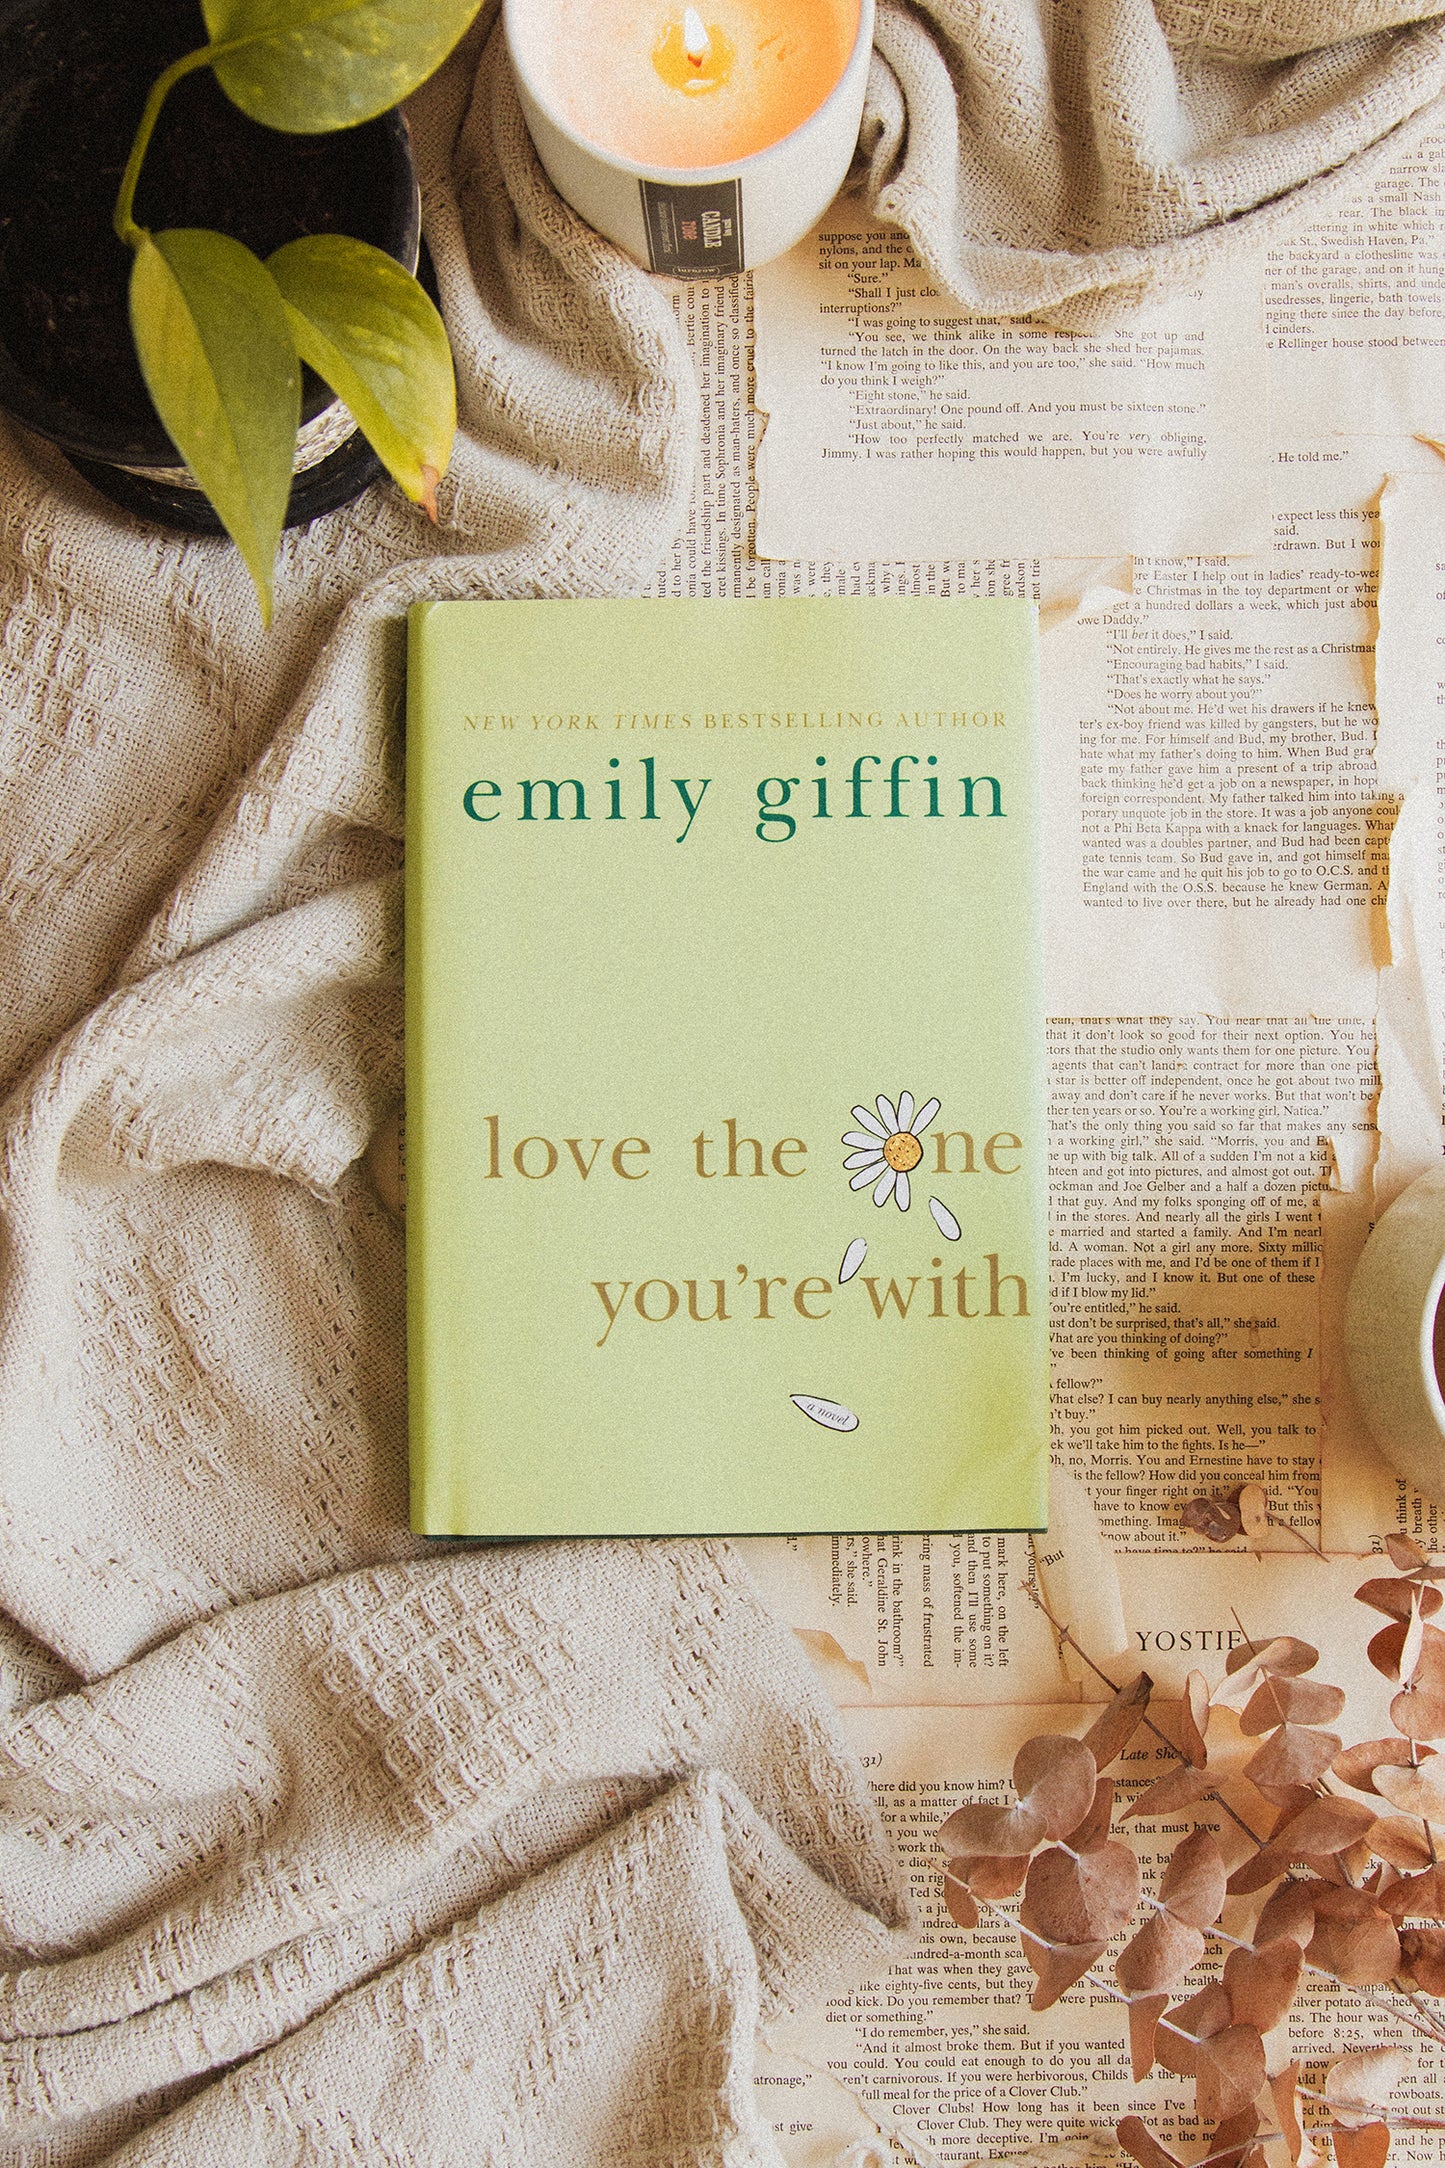 Love the One You're With by Emily Giffin